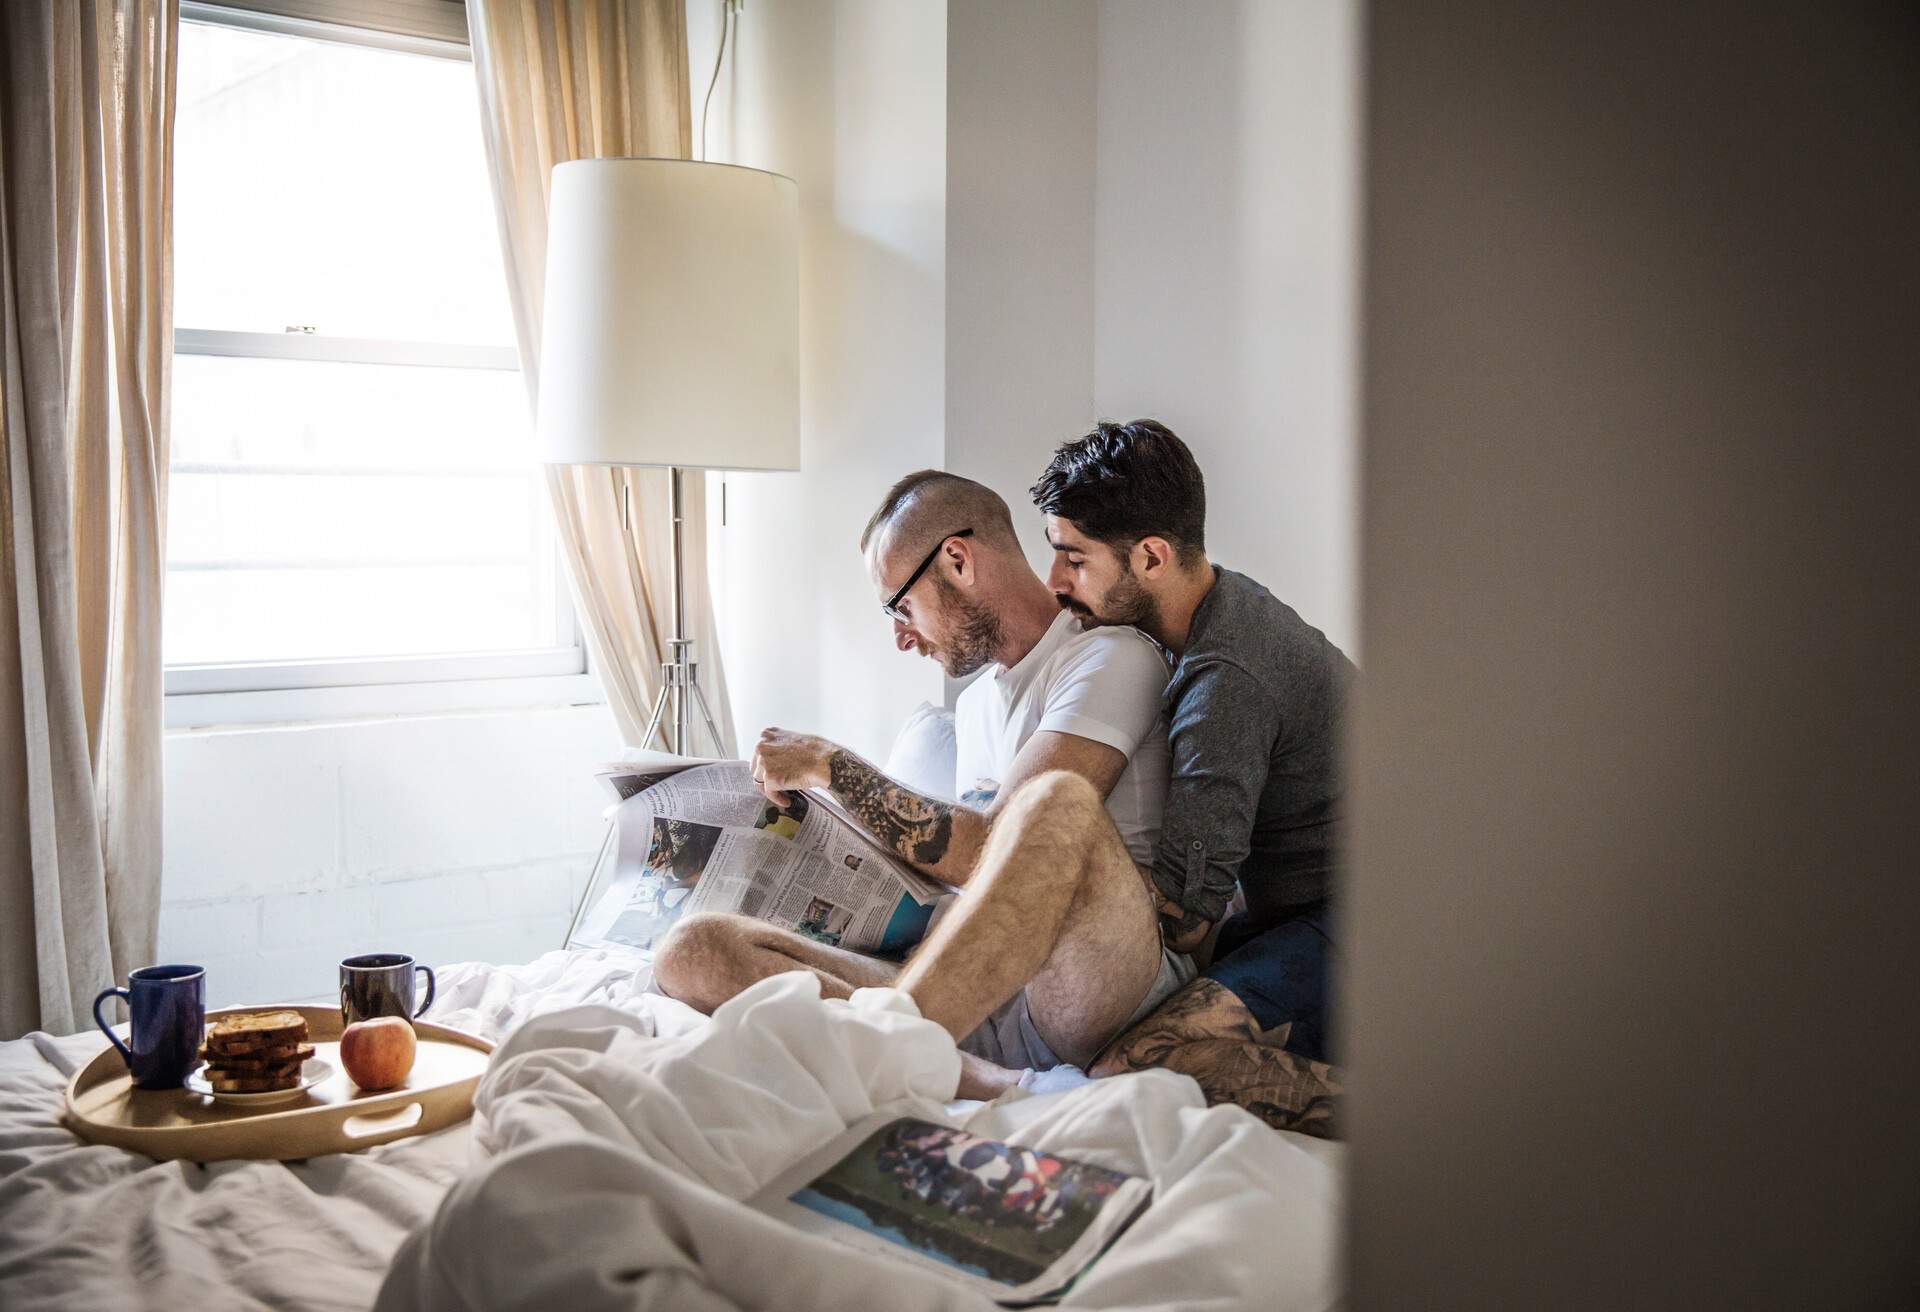 A person hugging his boyfriend from behind while sitting on the bed with breakfast on the tray and reading the newspaper.